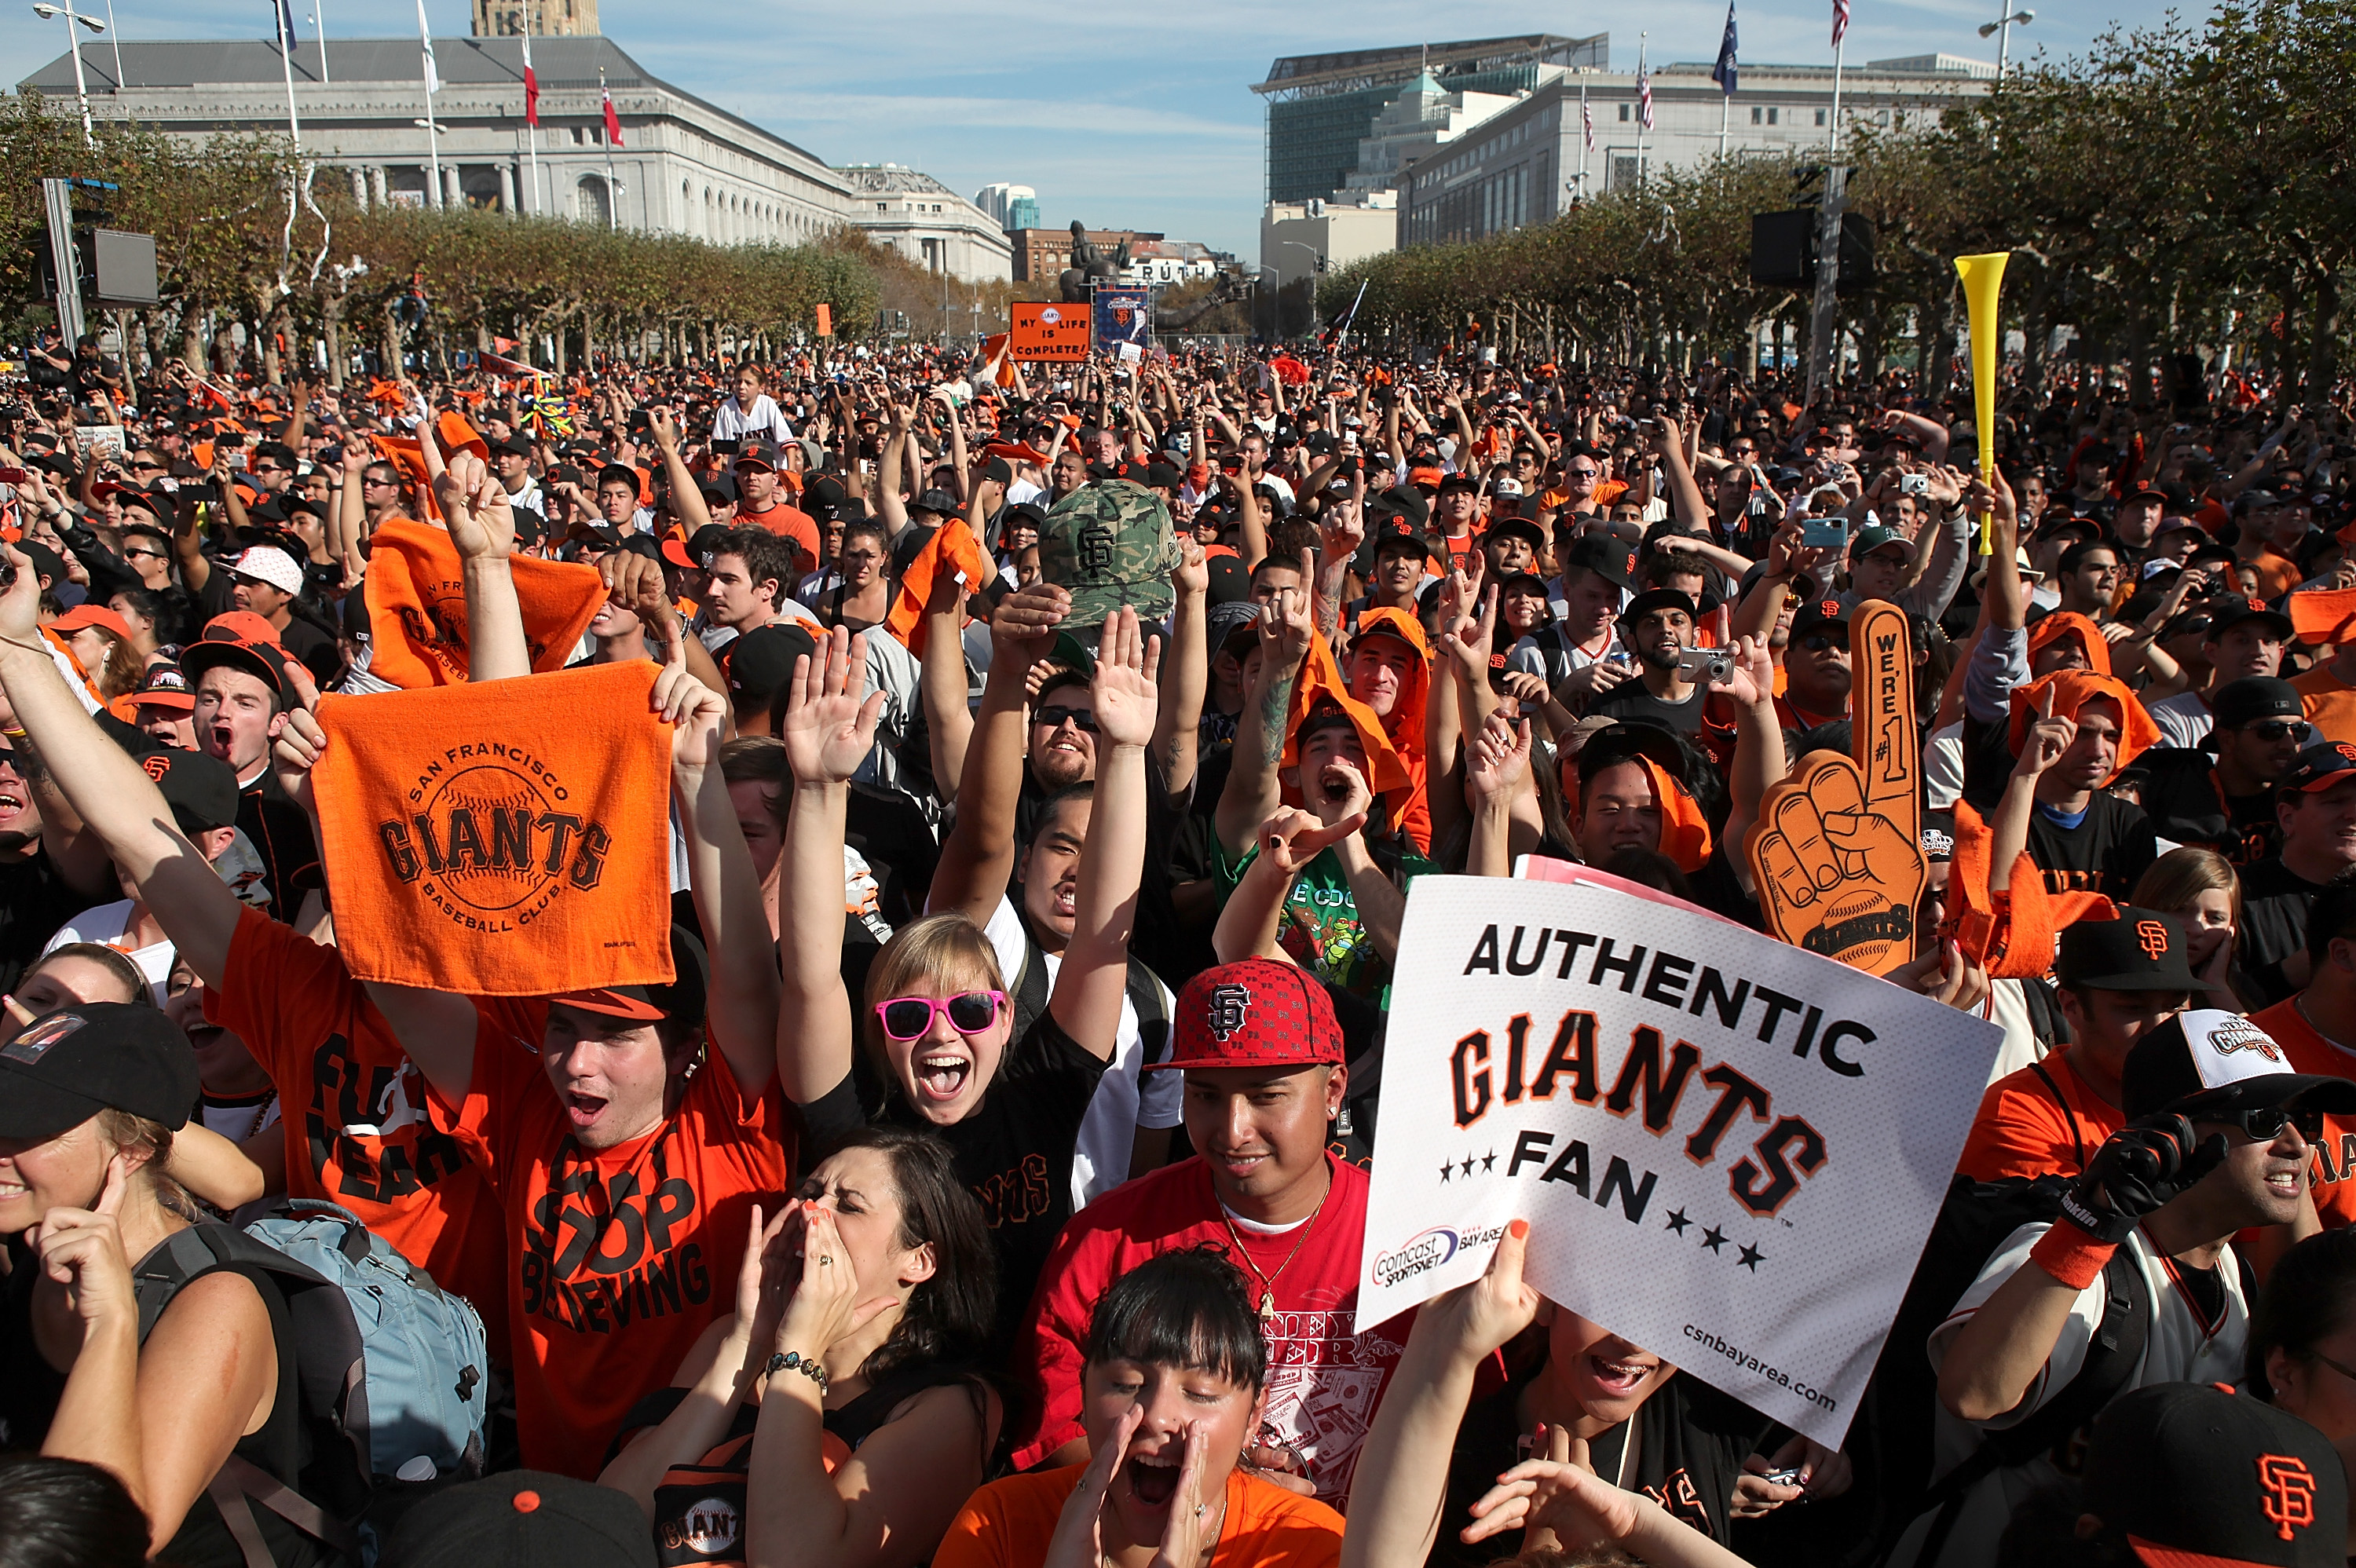 SAN FRANCISCO - NOVEMBER 03:  San Francisco Giants fans pack into the Civic Center Plaza during the Giants' victory parade on November 3, 2010 in San Francisco, California. Thousands of Giants fans lined the streets of San Francisco to watch the San Franc